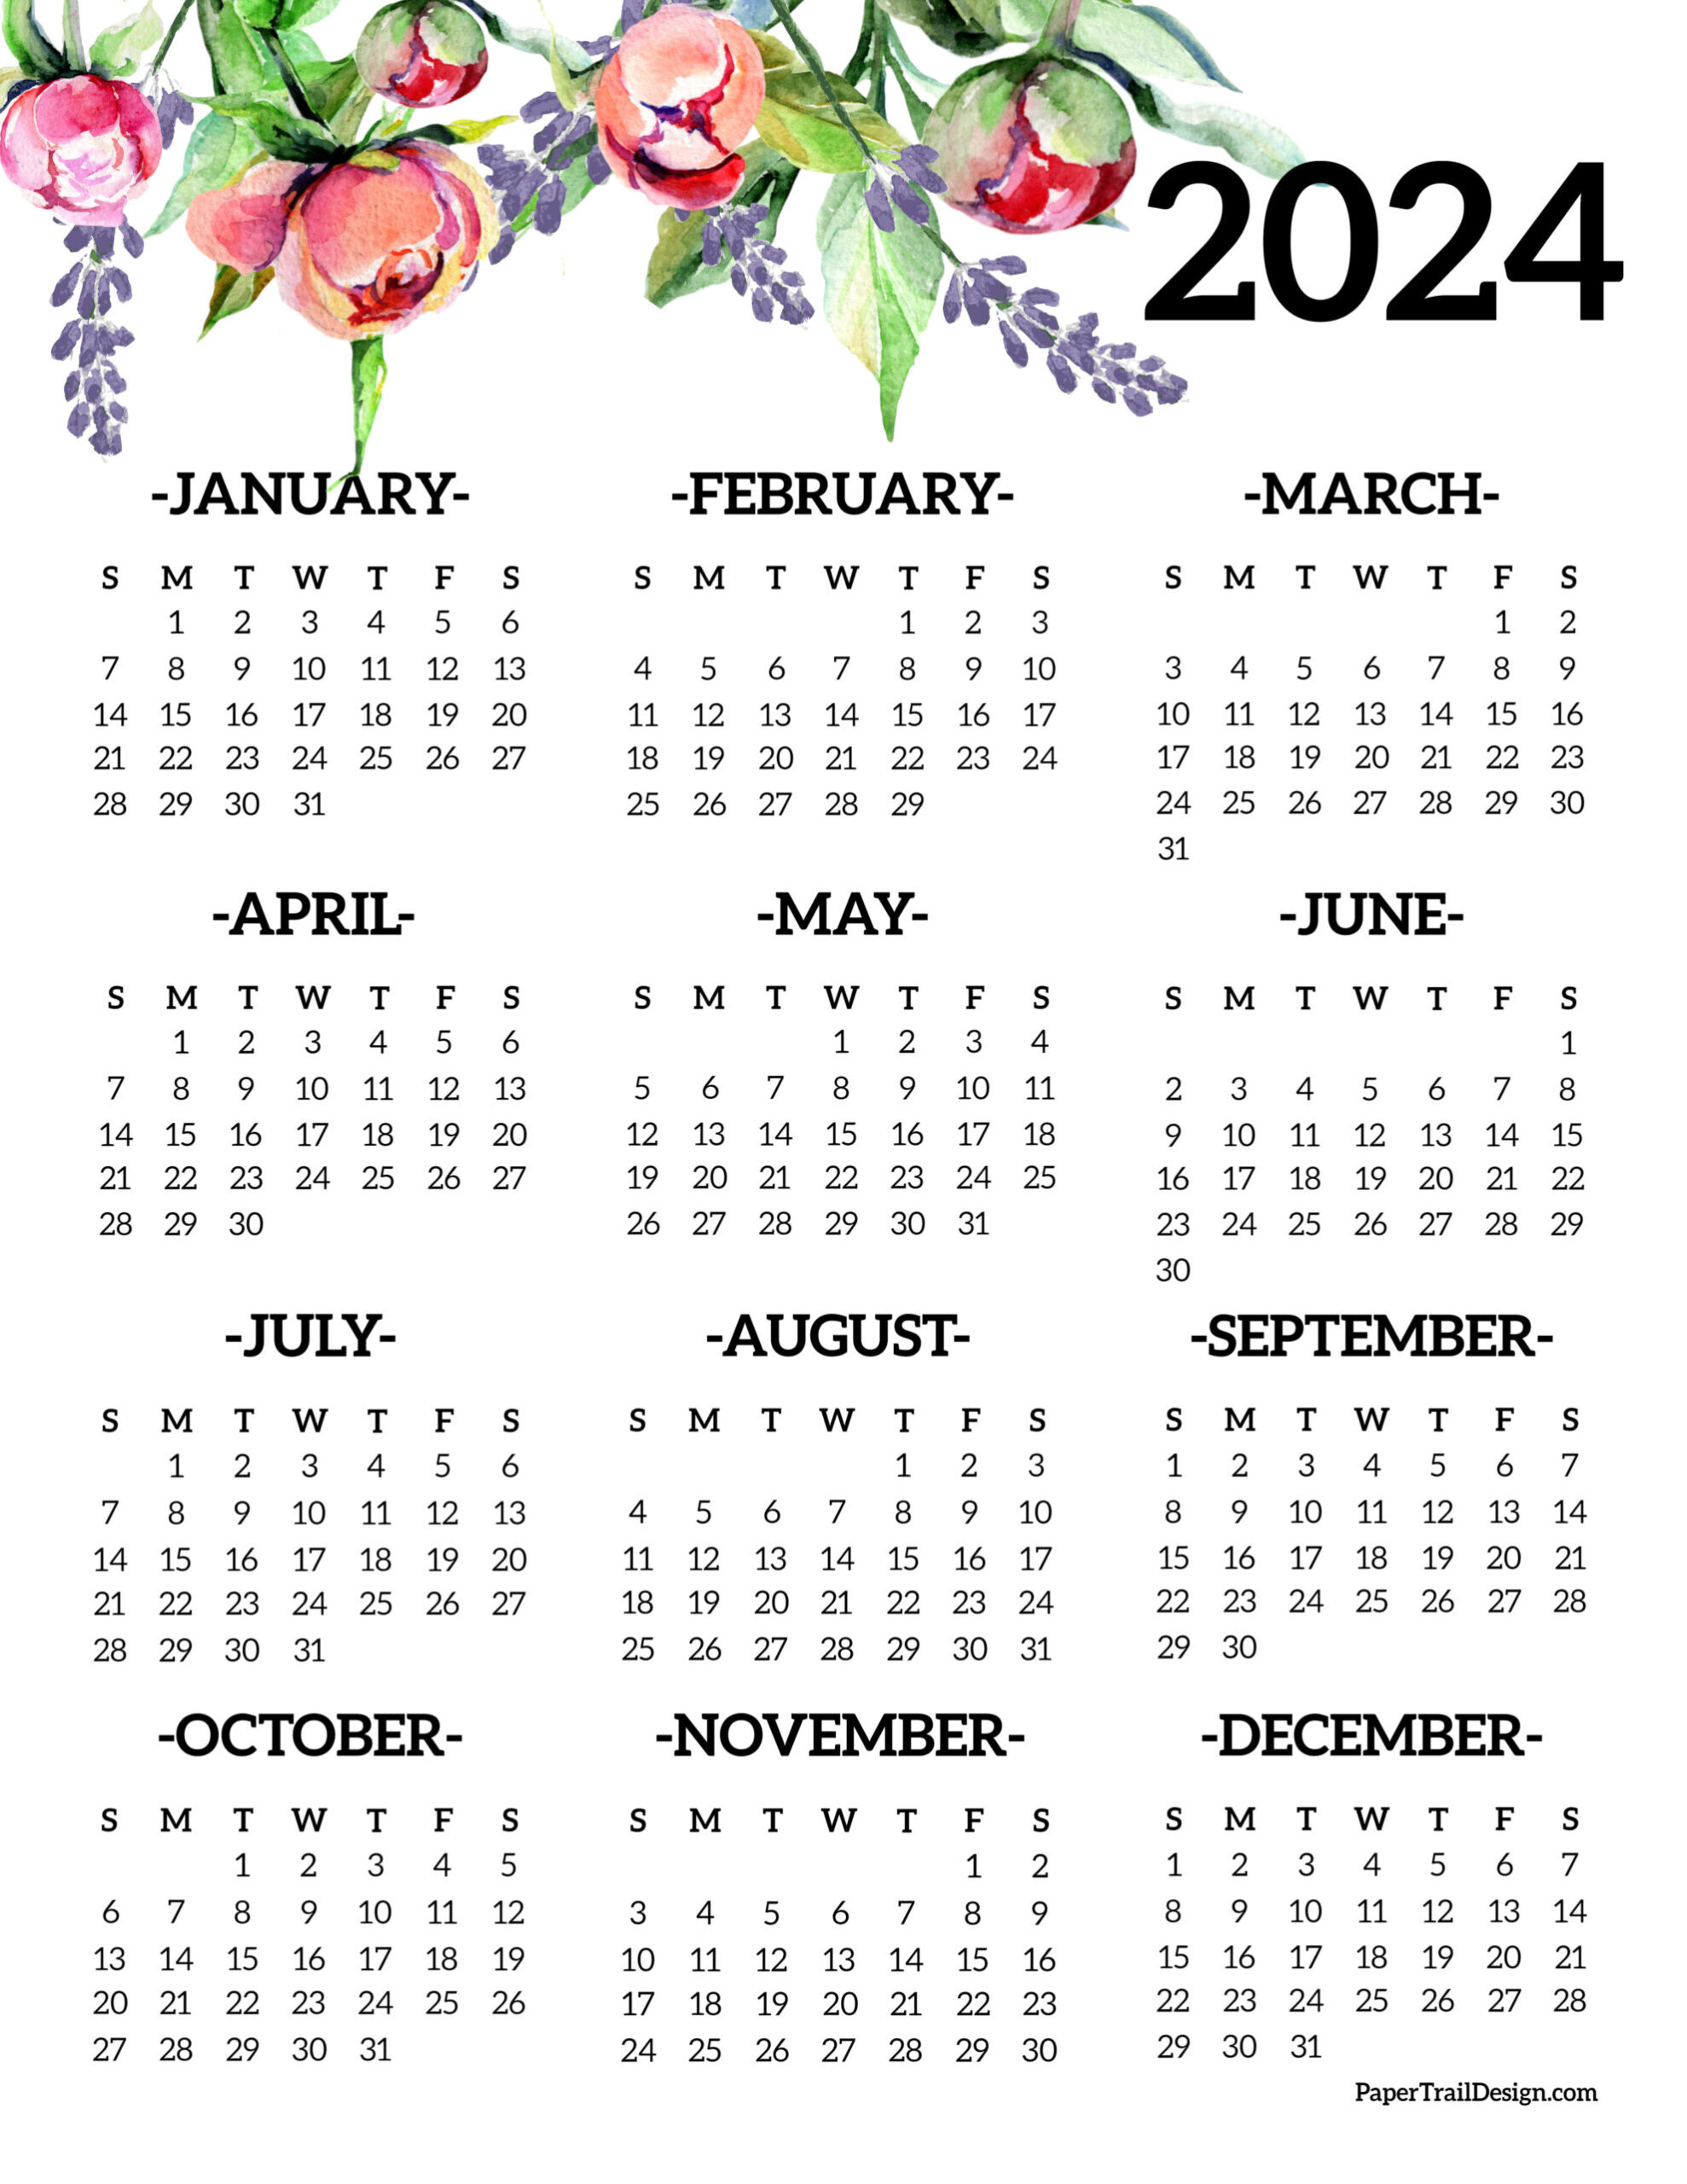 Calendar 2024 Printable One Page - Paper Trail Design for Printable One Page Calendar 2024